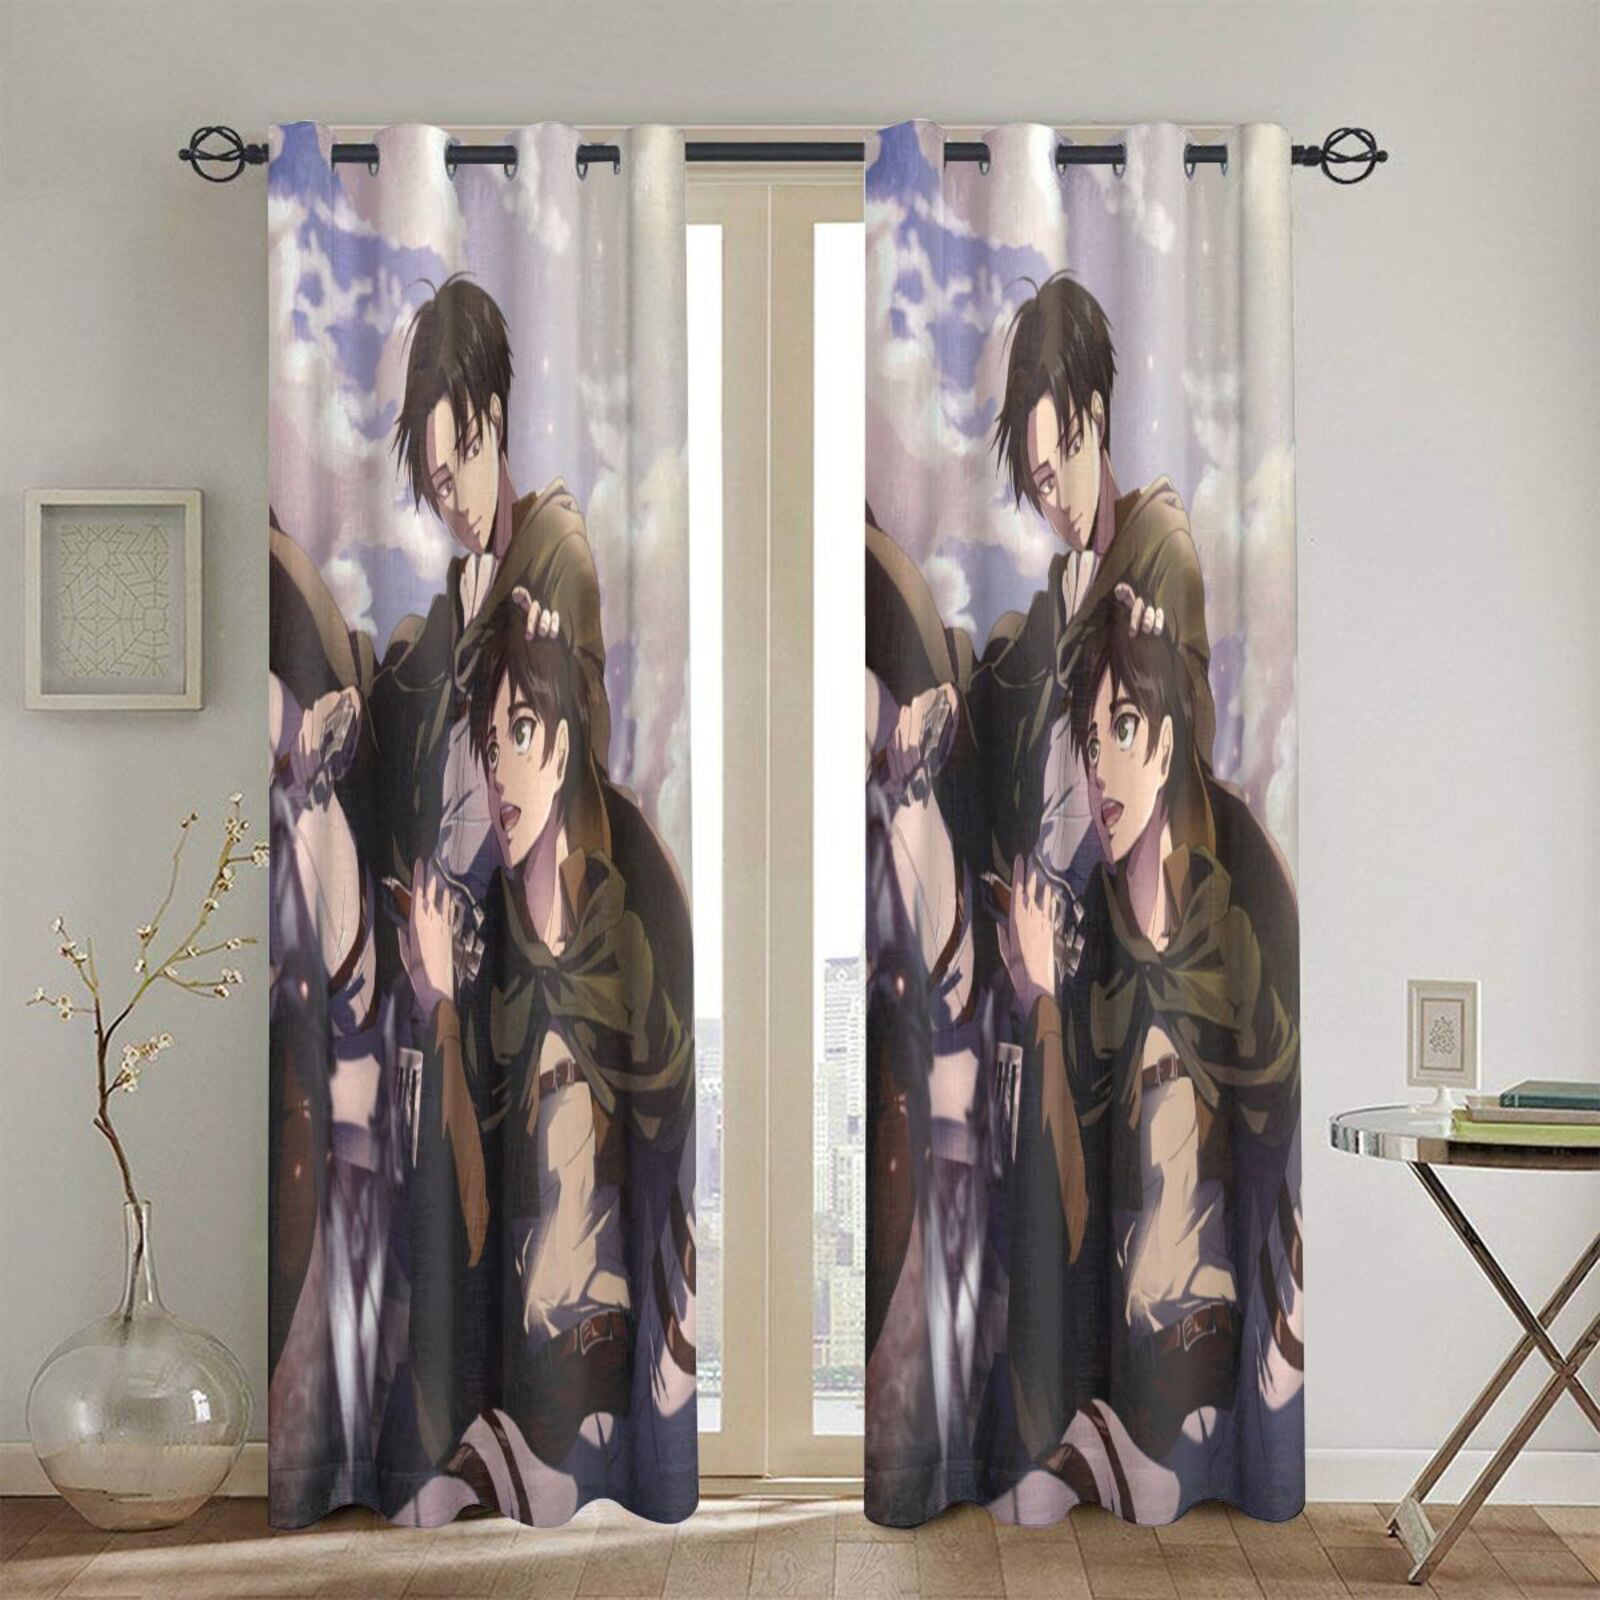 Details about   Attack on Titan Indoor Window Curtain Blackout Drapes Set of 2 Panels Many Sizes 